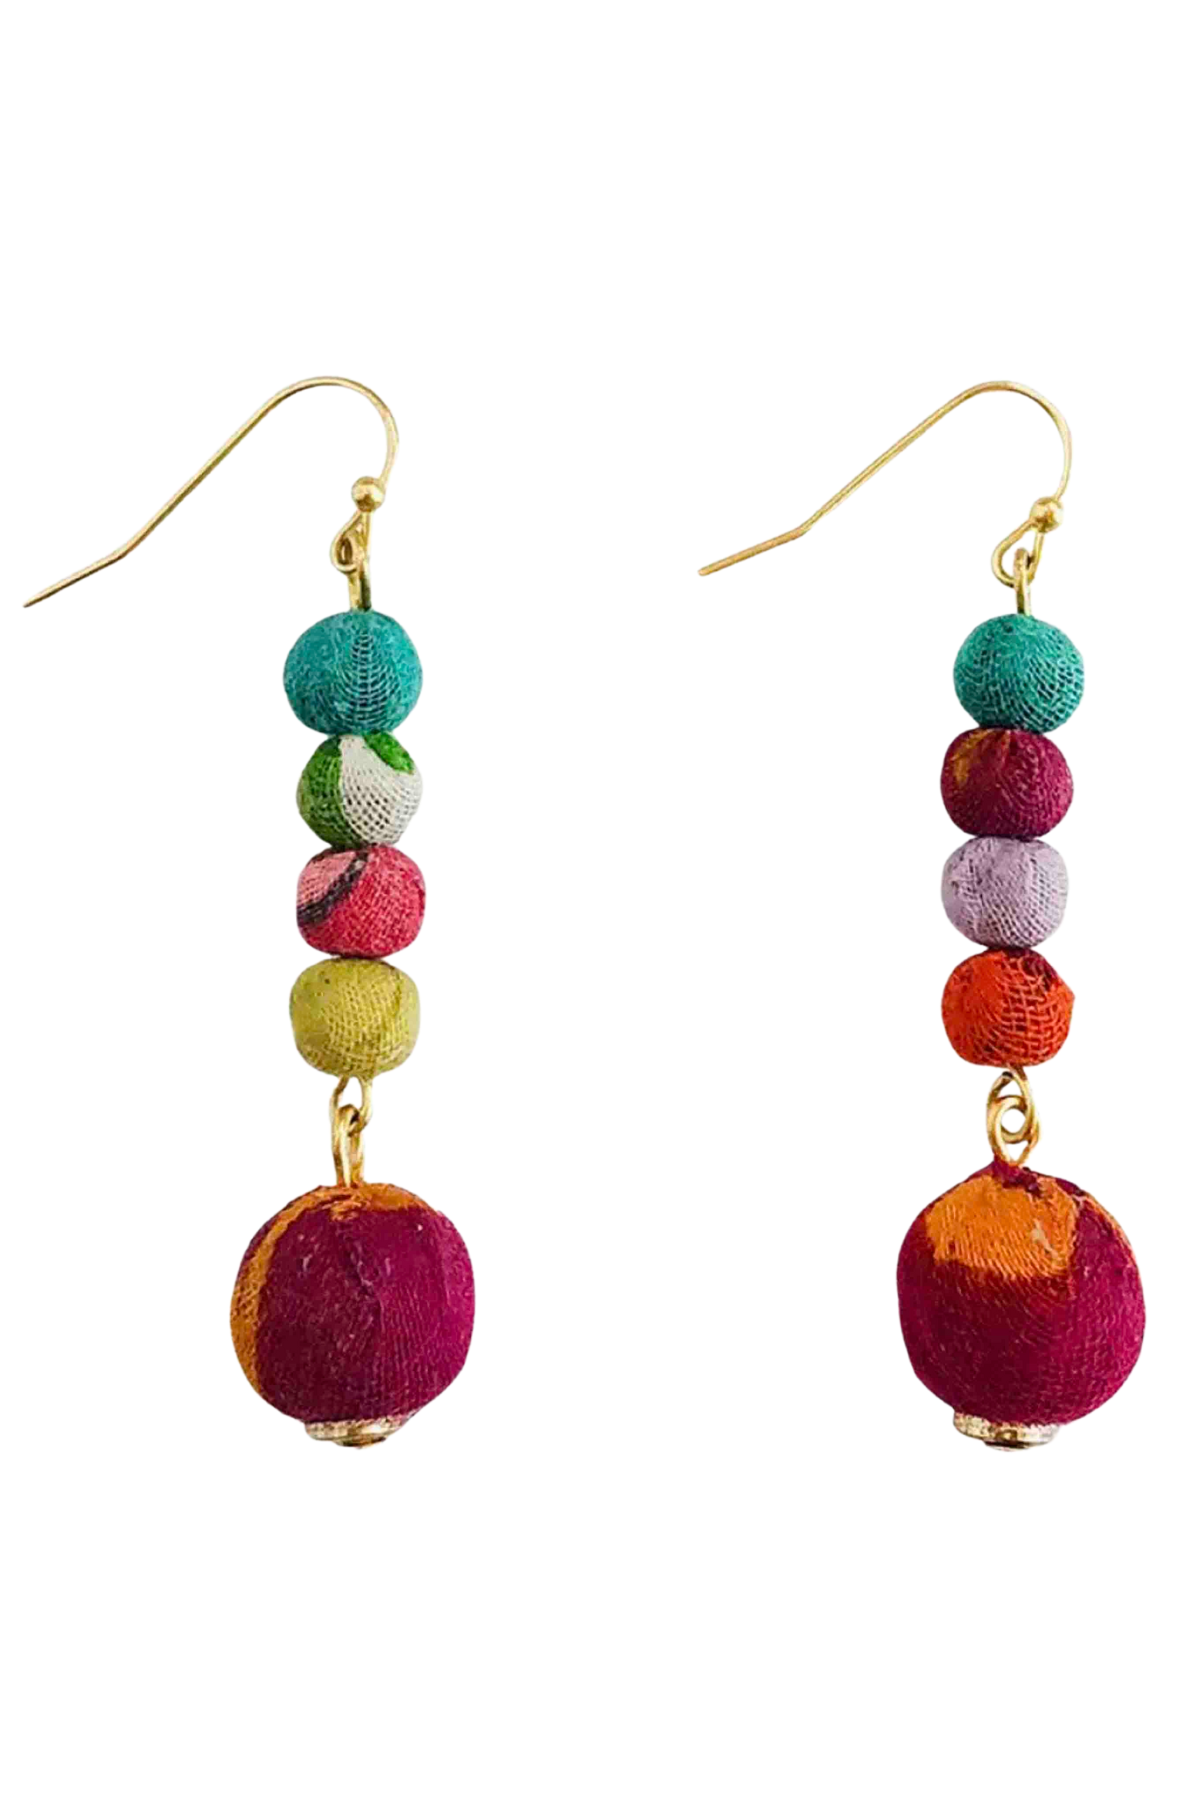 Multicolored Dripping Kantha Earrings by World Finds